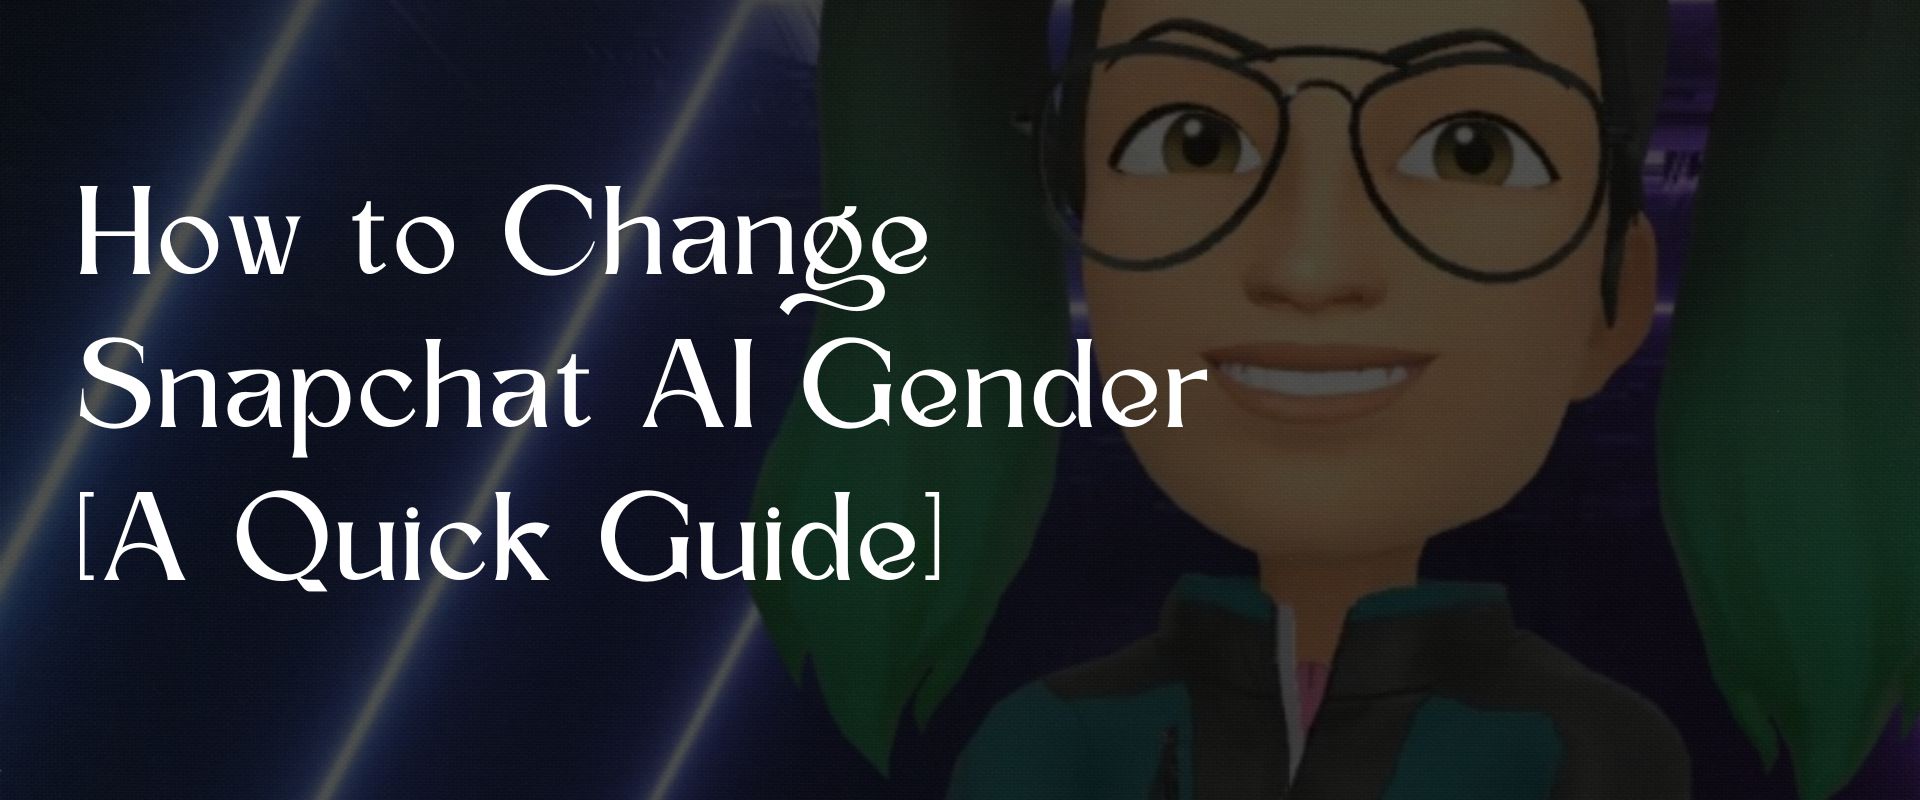 How to Change Snapchat AI Gender (A Quick Guide)